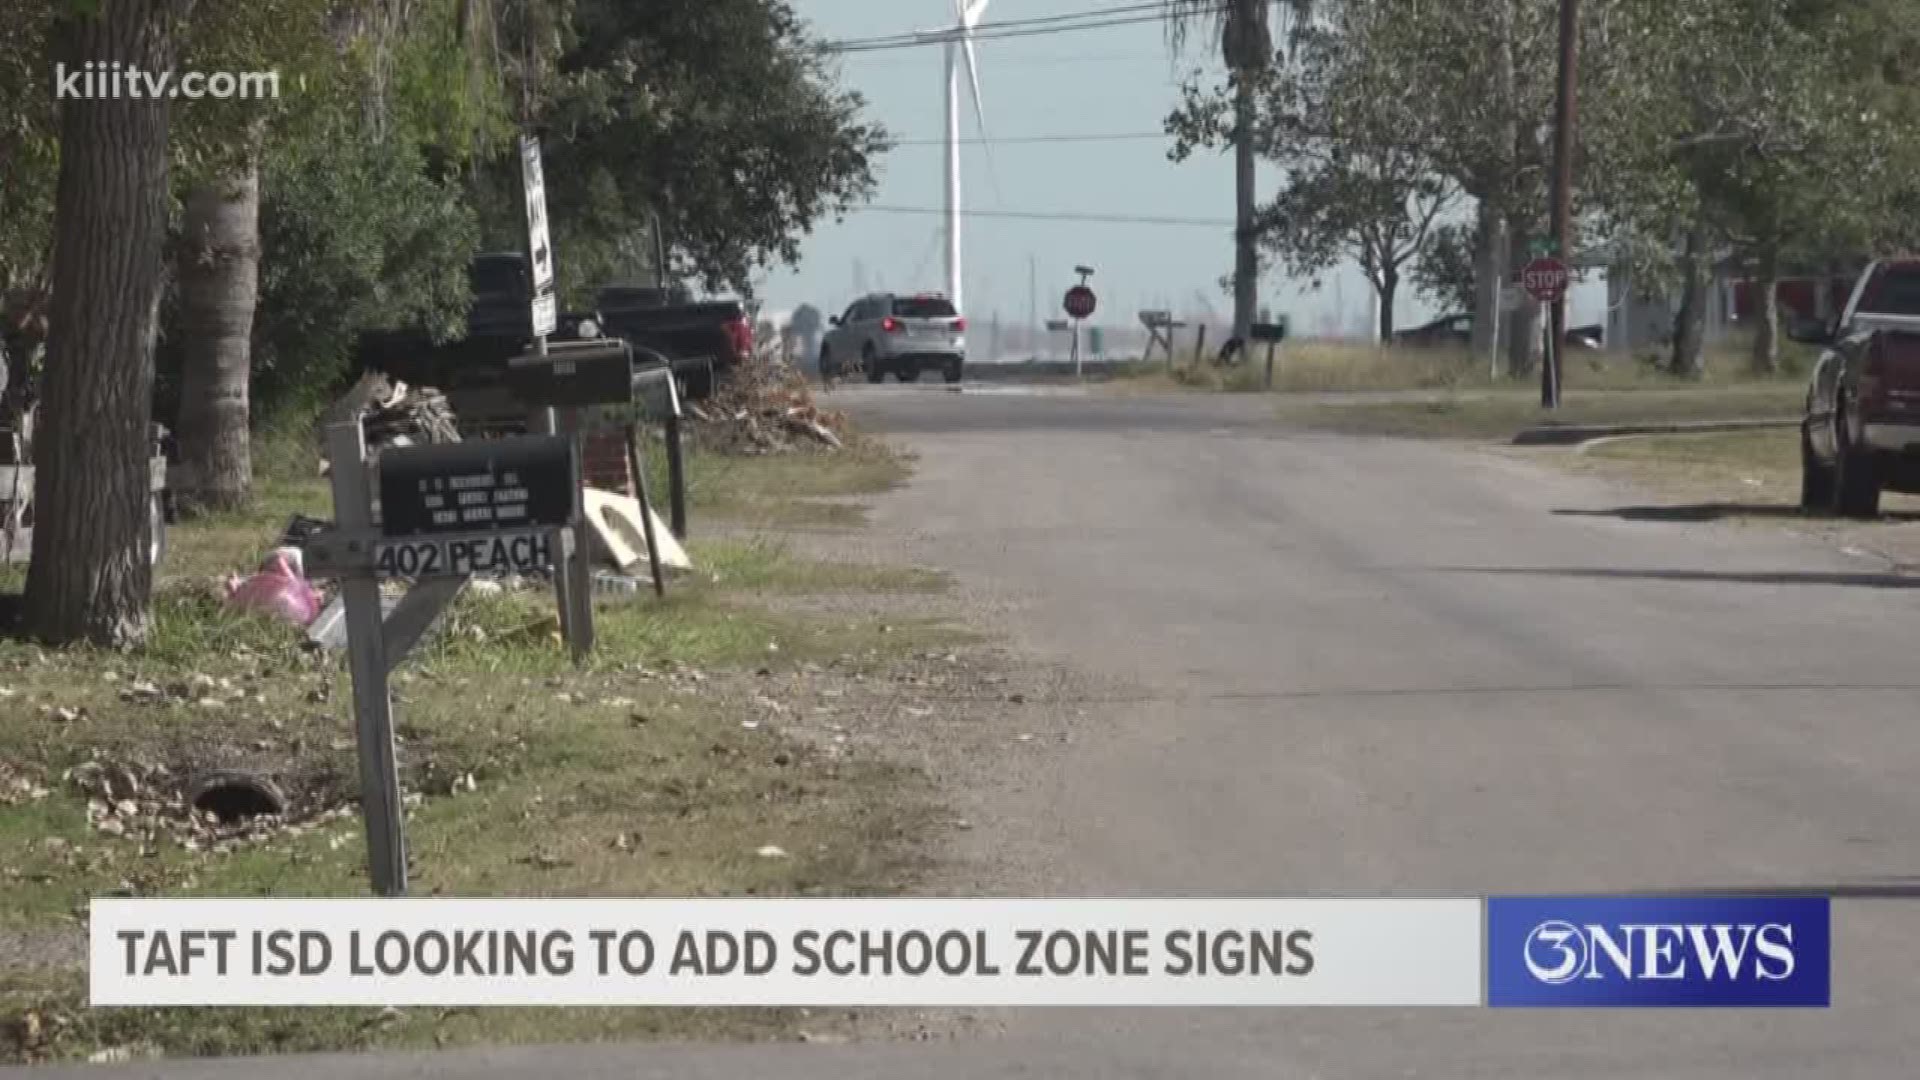 Students in Taft might have a safer walk to and from school thanks to the planned addition of more school zone signs